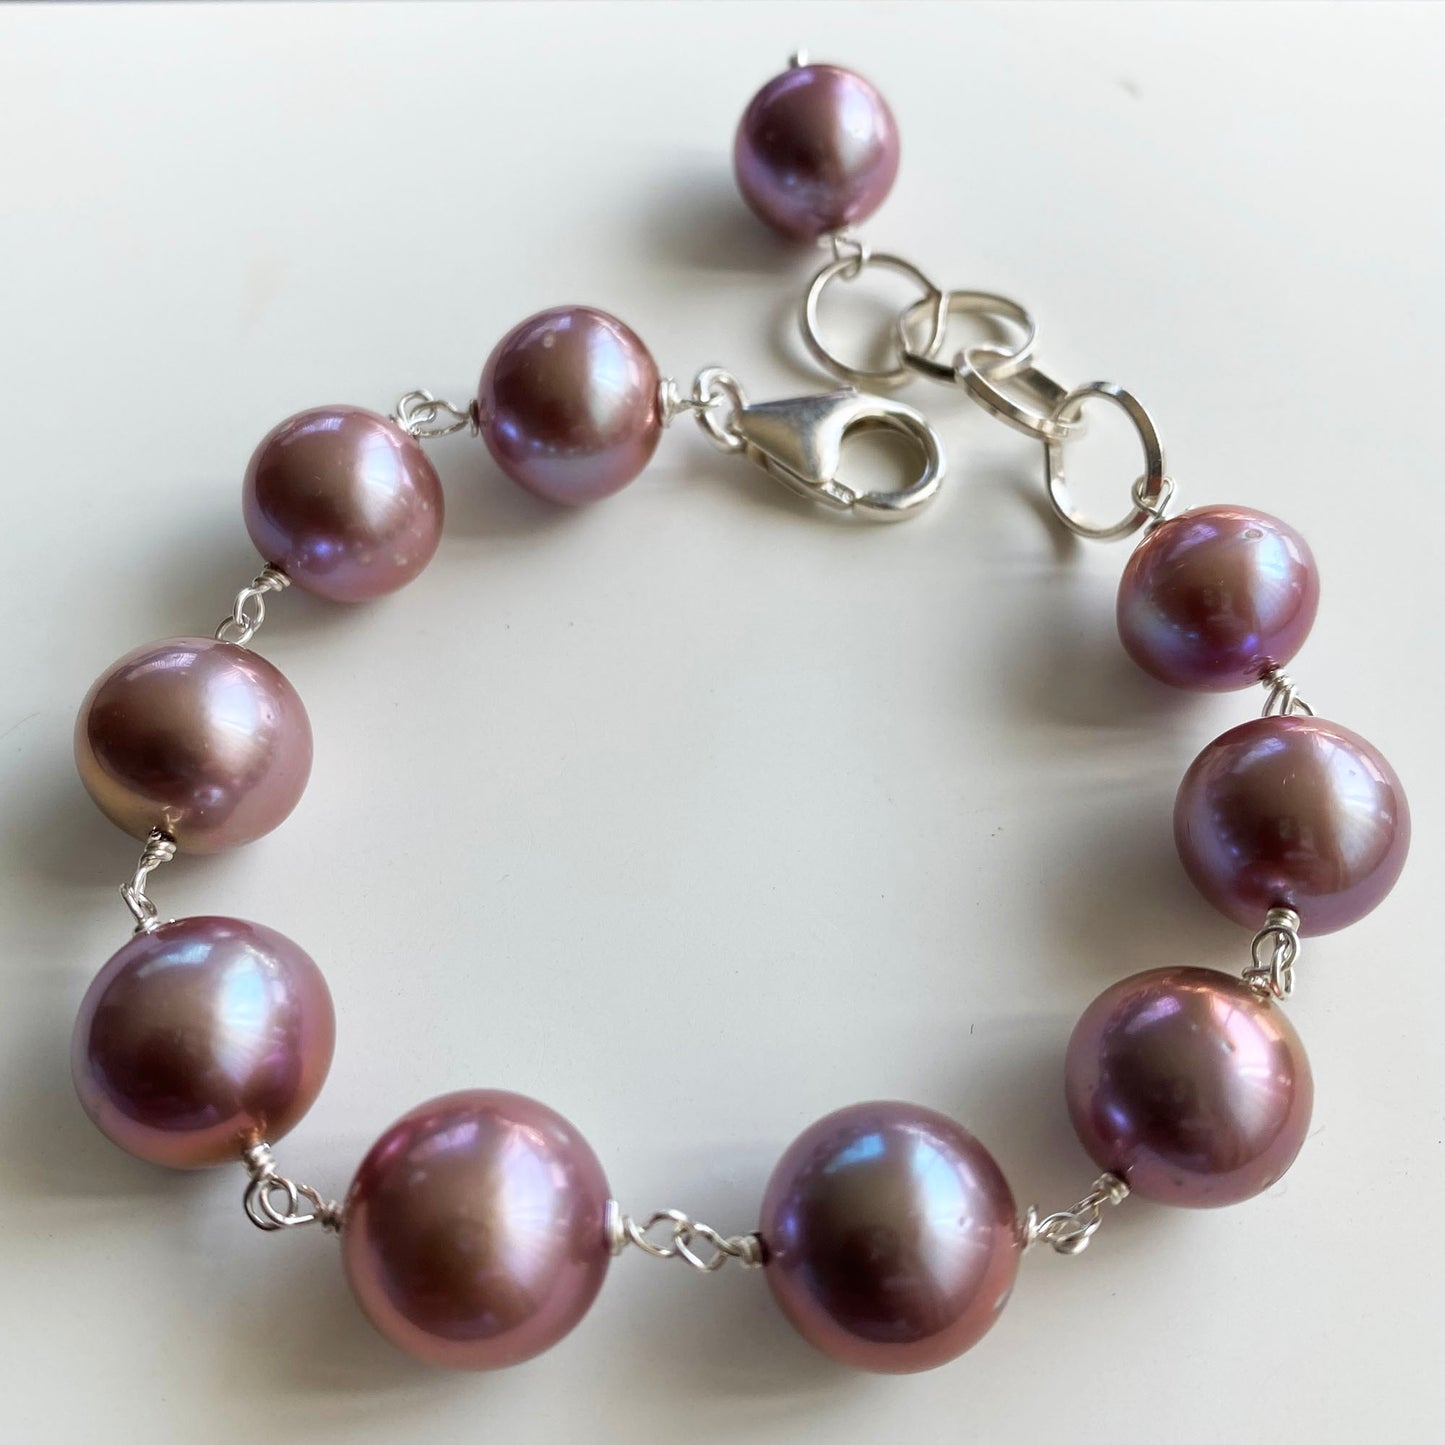 Graduated Lavender Freshwater Pearl bracelet by Linda Queally